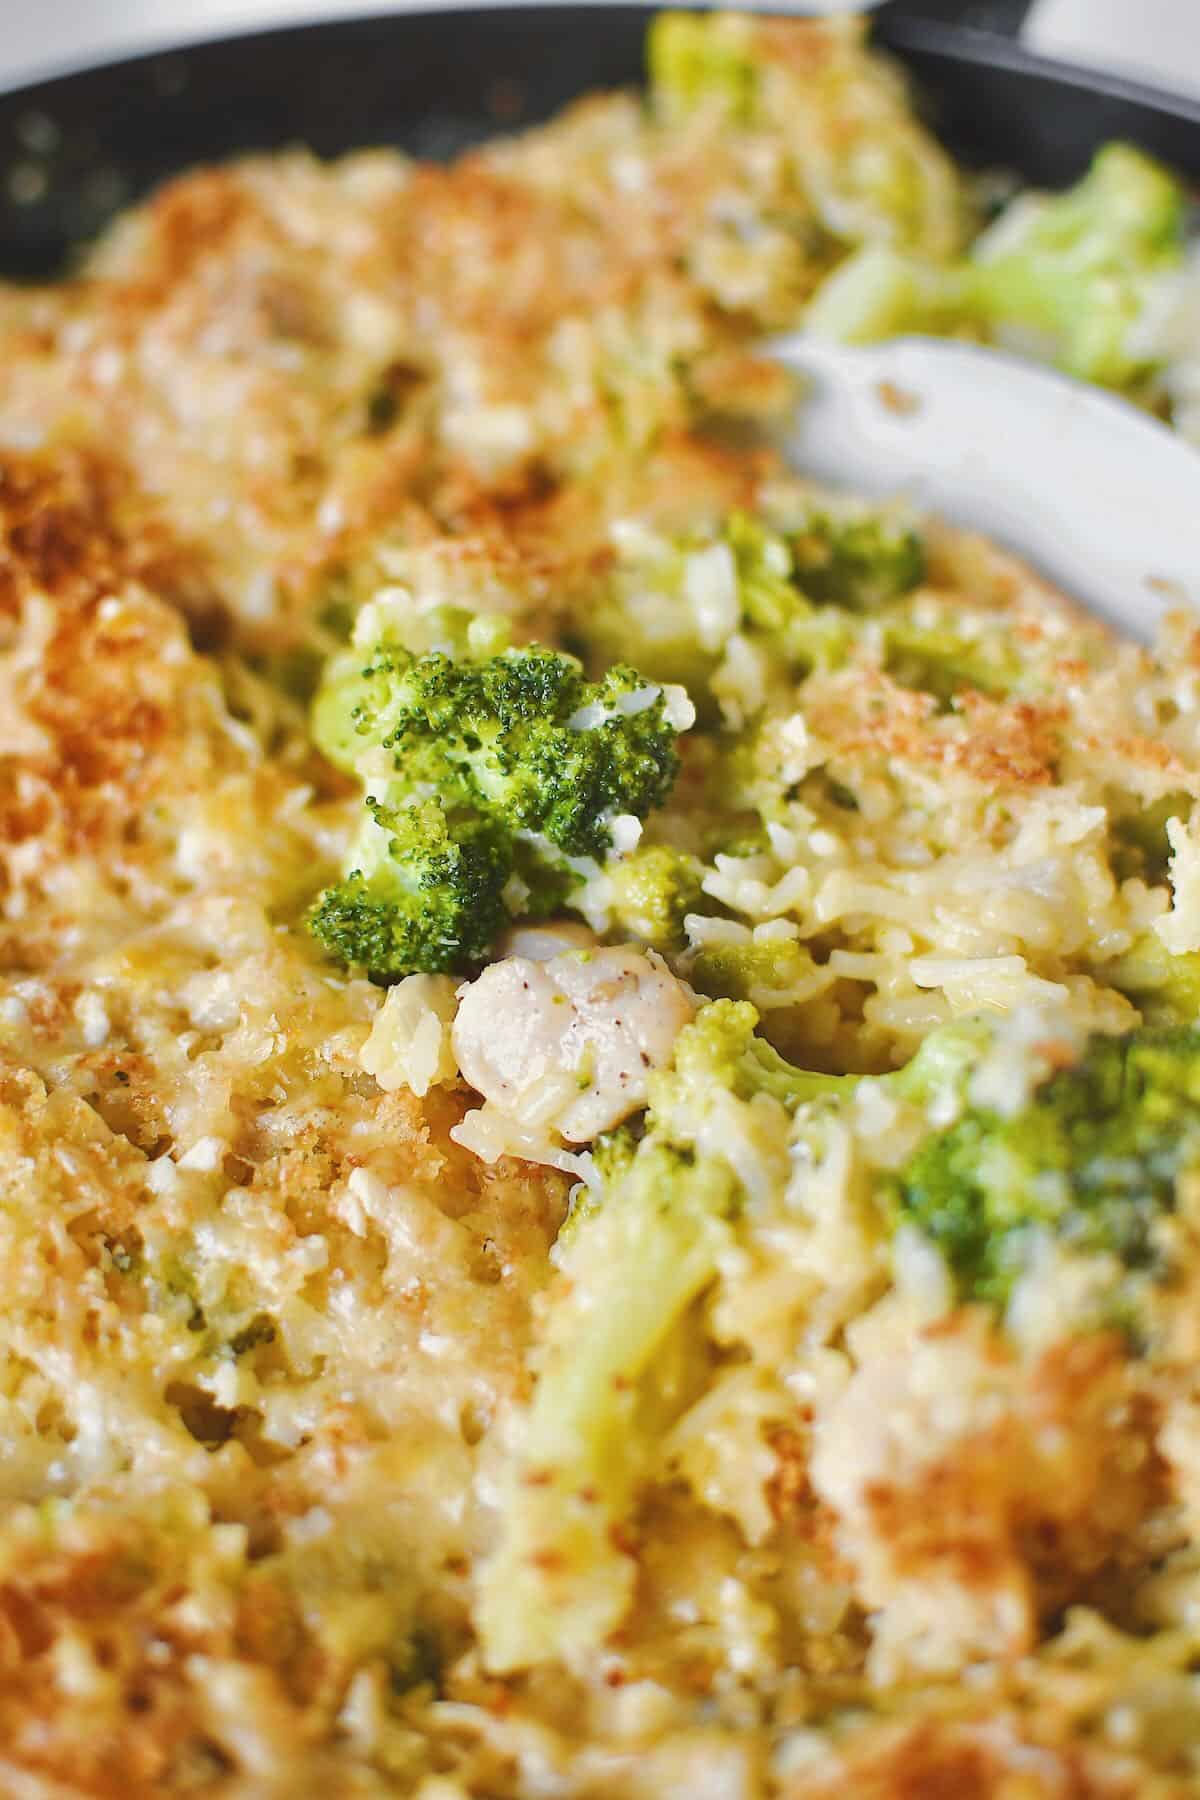 Scooping out some Chicken and Broccoli Rice Casserole.